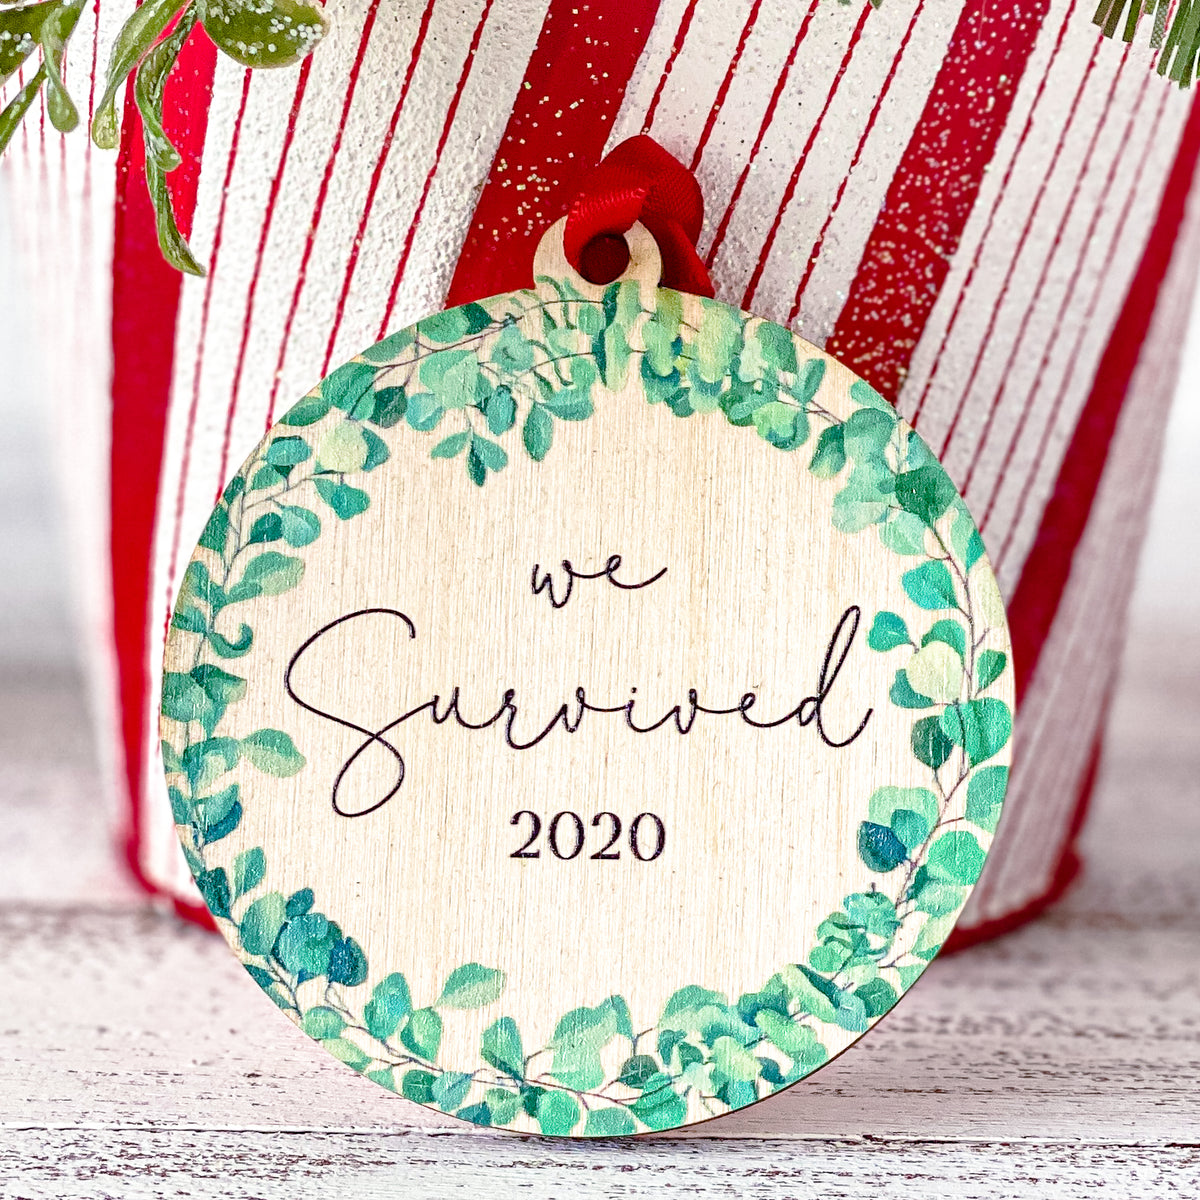 We Survived 2020 Ornament